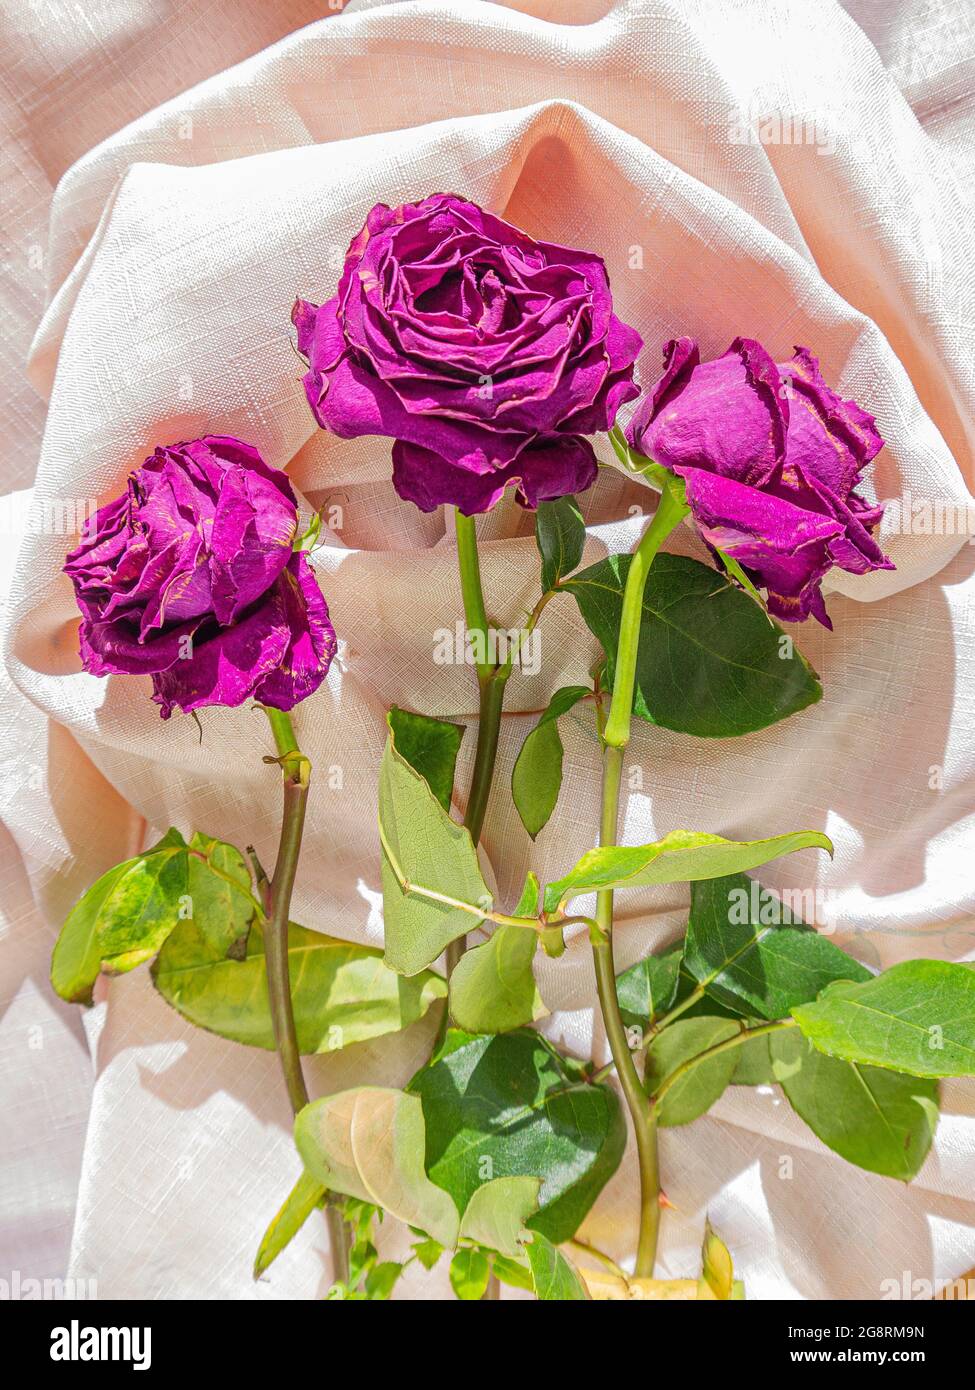 A bouquet of three wilted roses on a white cloth. Stock Photo